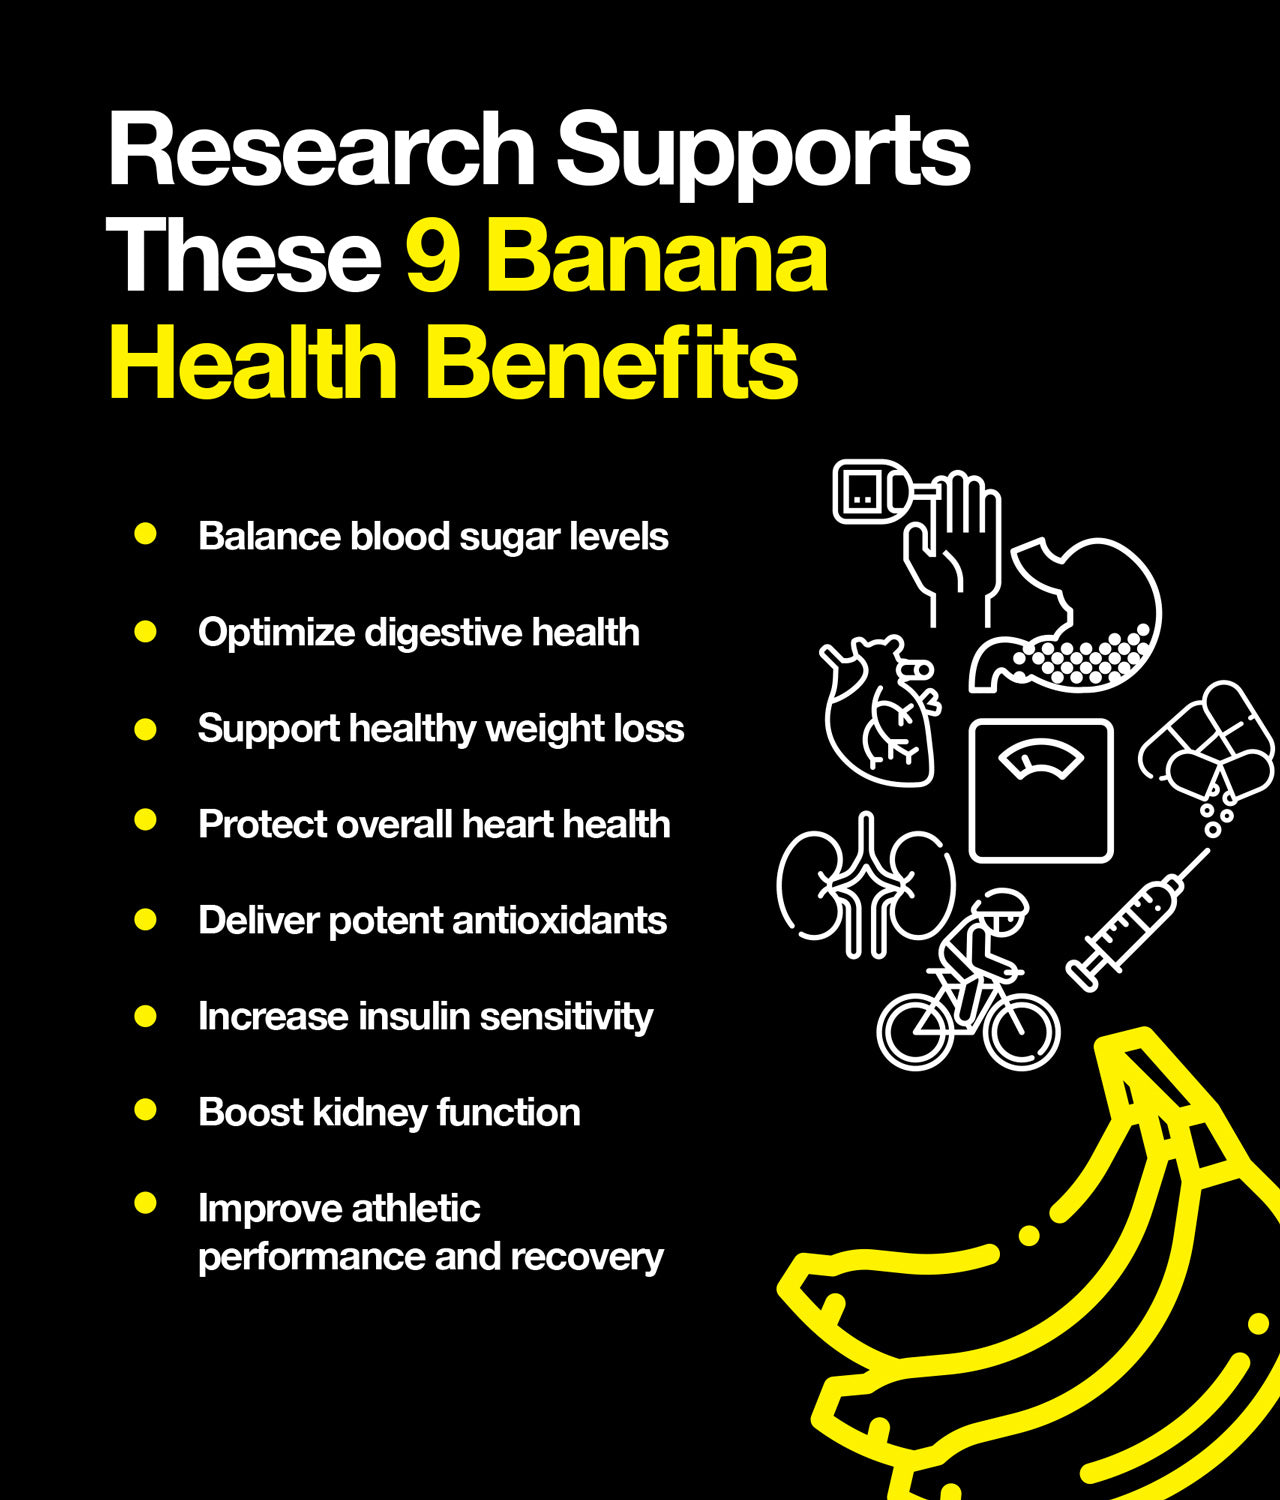 Research Supports These 9 Banana Health Benefits